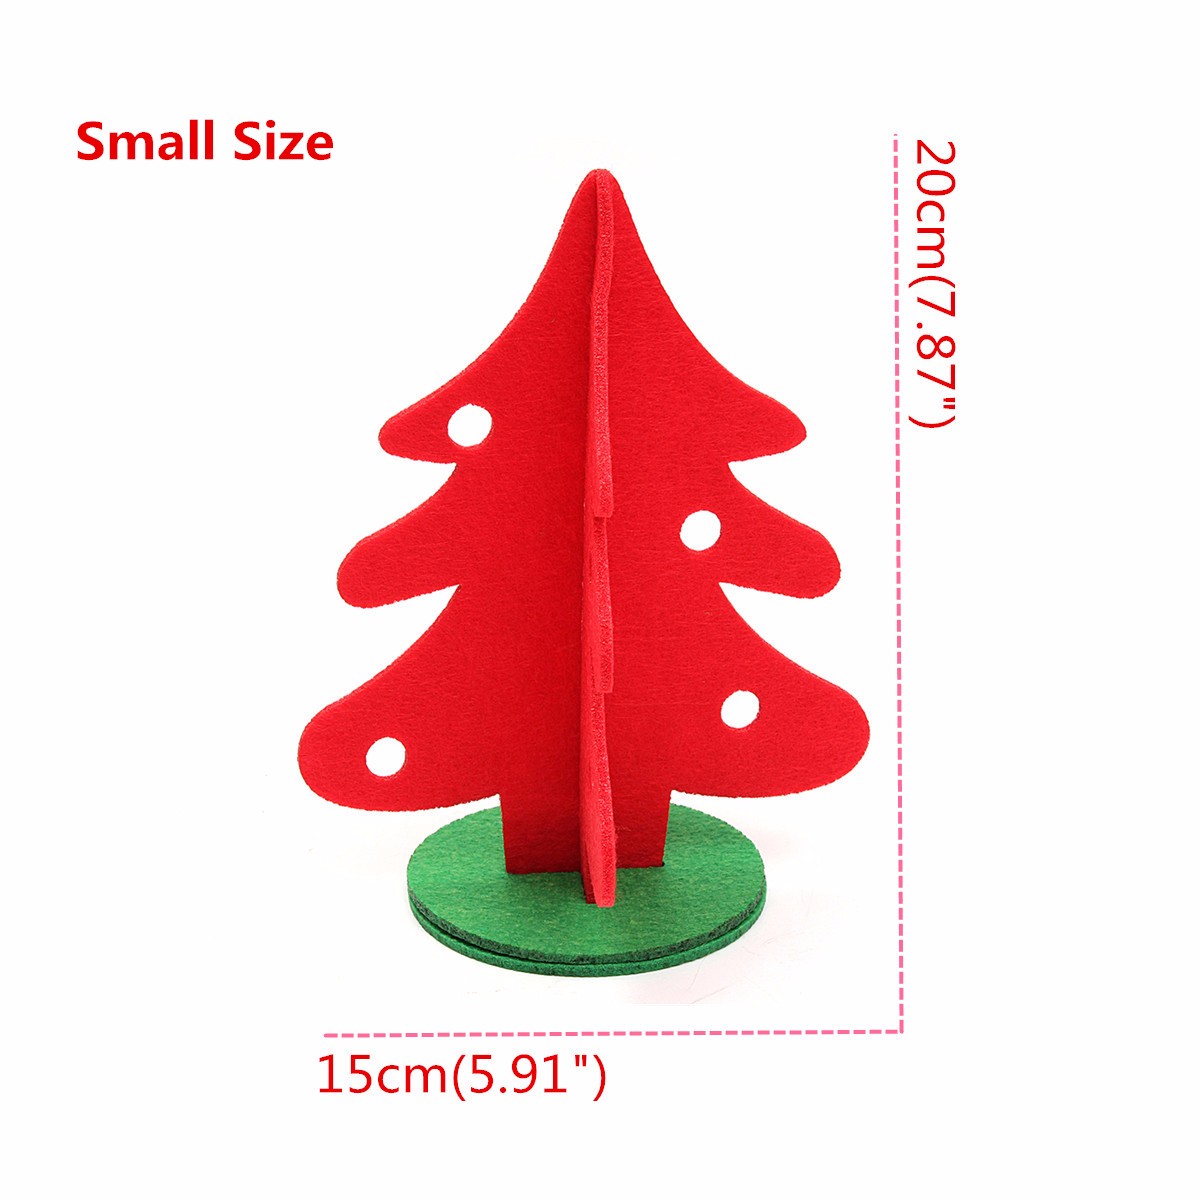 Vintage-Christmas-Tree-Home-Shop-Ornament-Decoration-Fabric-Red-Green-Tree-1103573-9